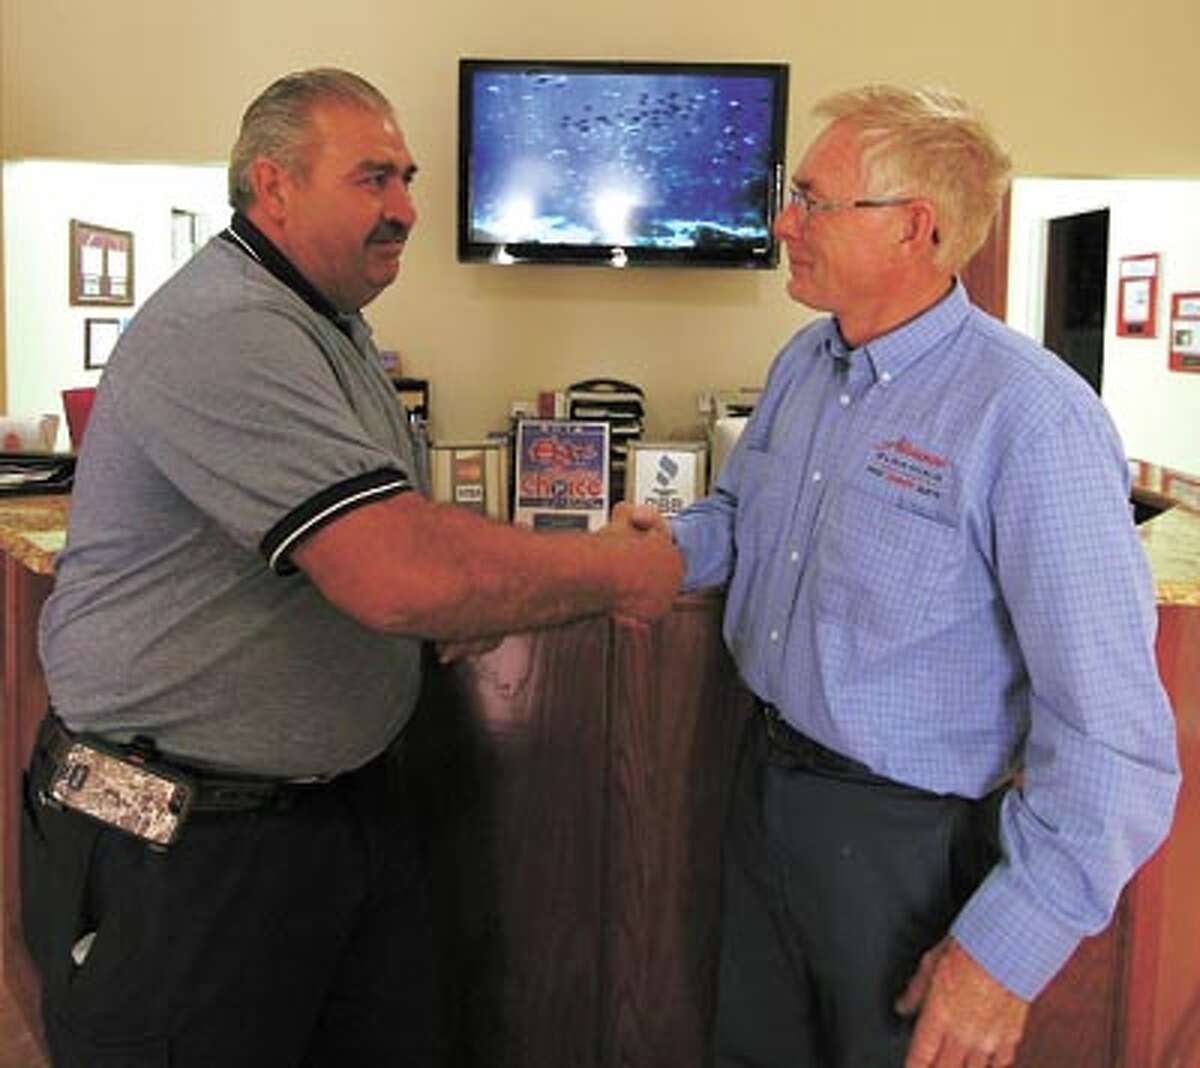 Advance Cleaning’s Holman Padgett, right, welcomes longtime area expert Joe Balli to the staff. Call Advance Cleaning for help with fire or flood damage or for basic carpet and floor cleaning. Their phone number is 550-8325.